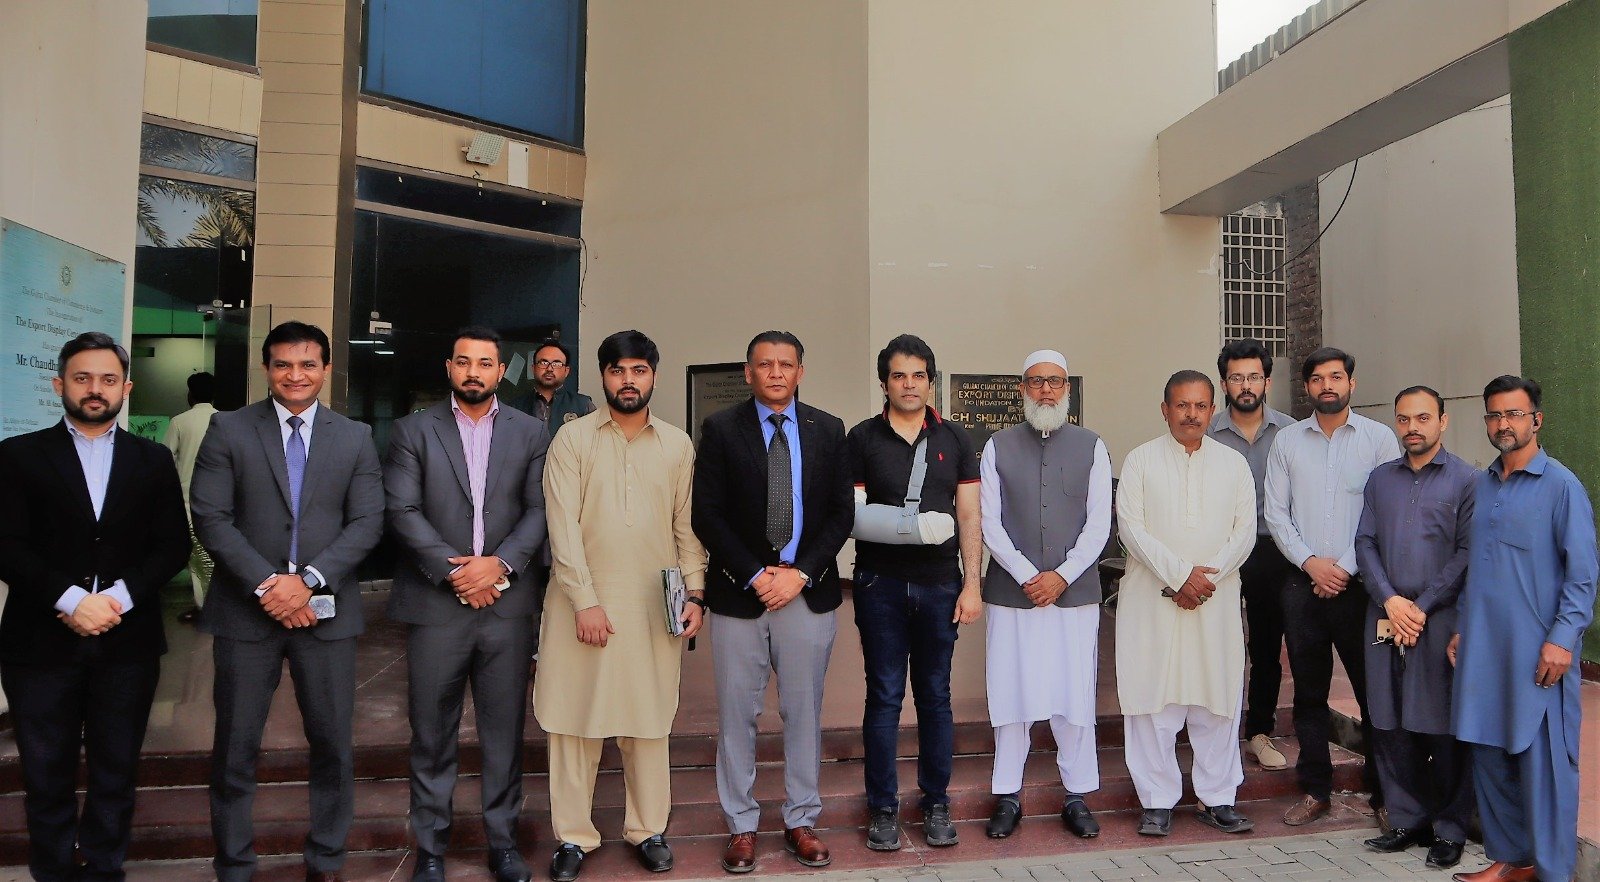 The #Meeting #Session was held in Gujrat Chamber of commerce and Industry with Pakistan Sports Goods Manufacturing and Exporters Association #PSGMEA under the presidency of Mr. Sikander Ishfaq Razi #President #GtCCI .